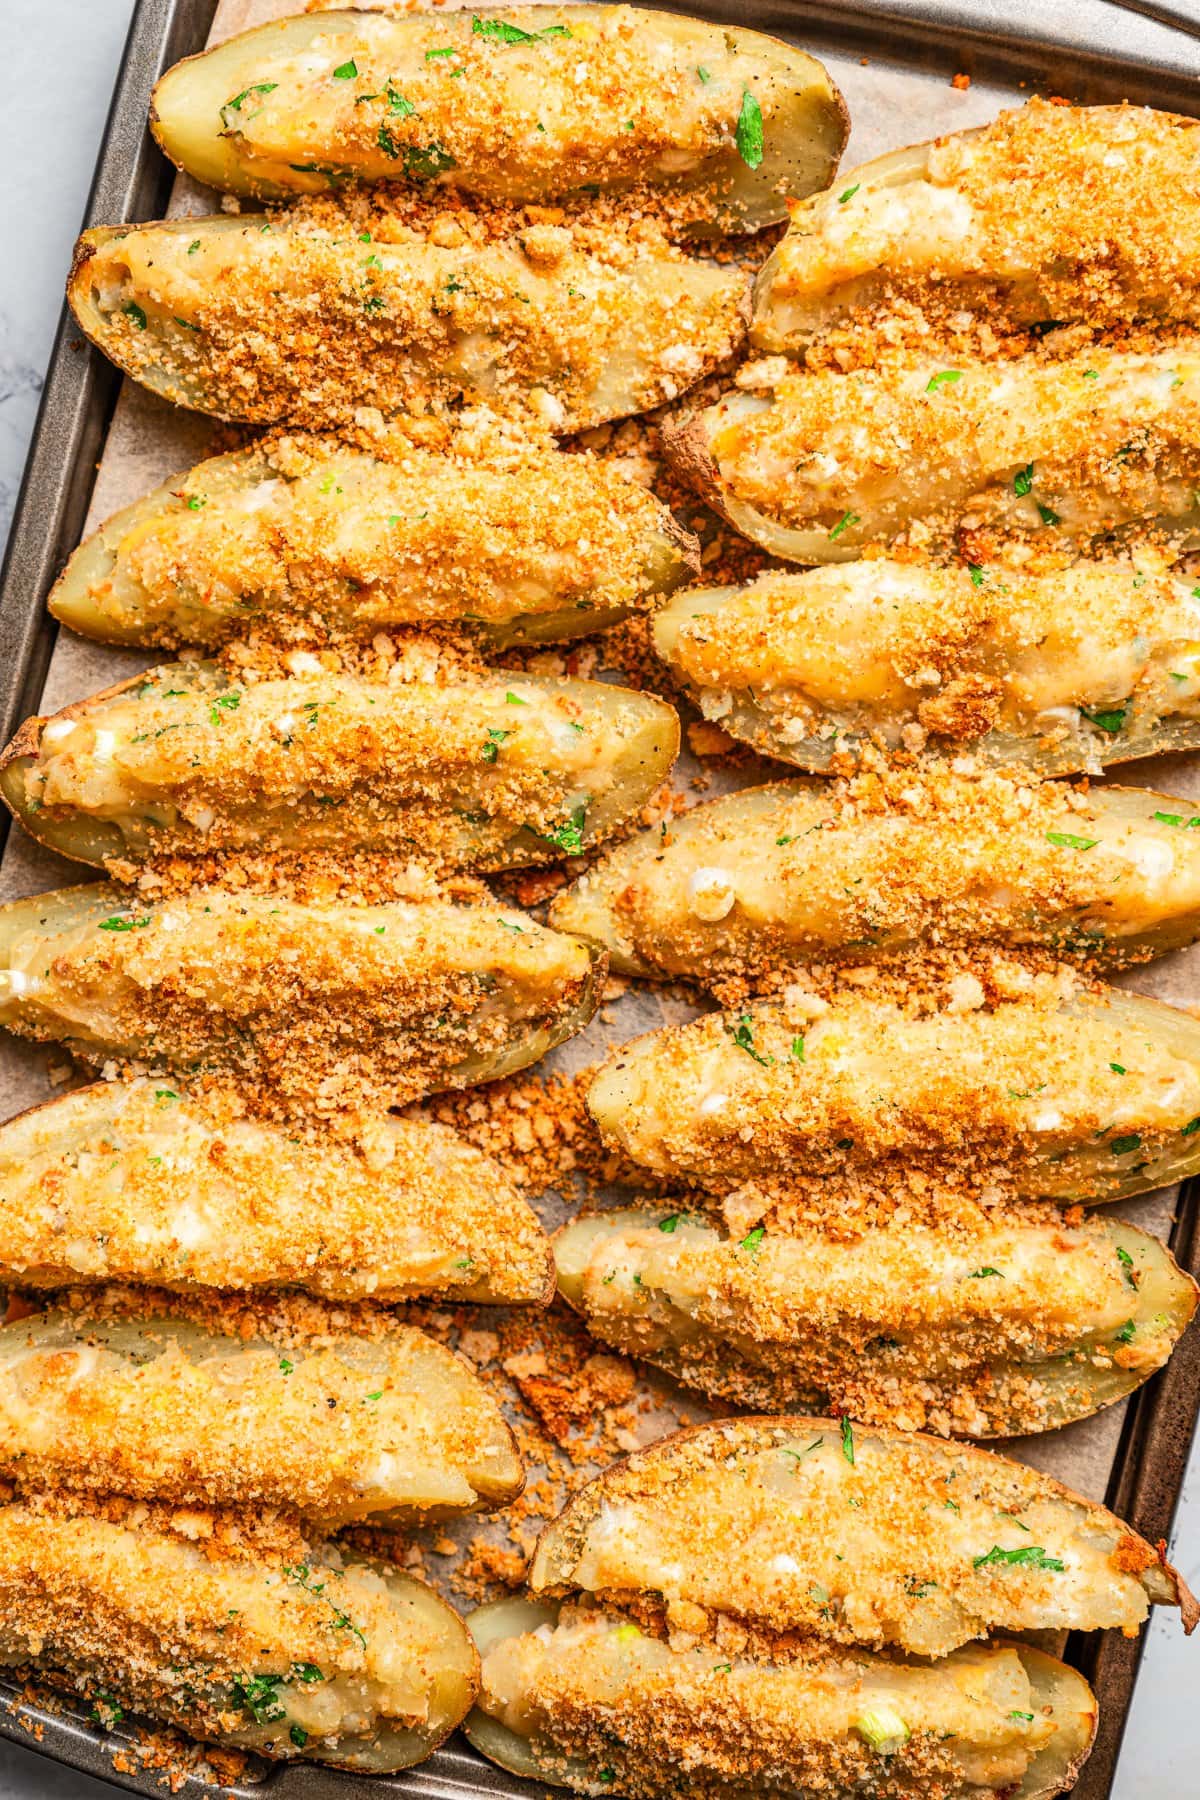 Crispy potato skins filled with mashed potato mixture, topped with crushed croutons, and arranged on a baking sheet.